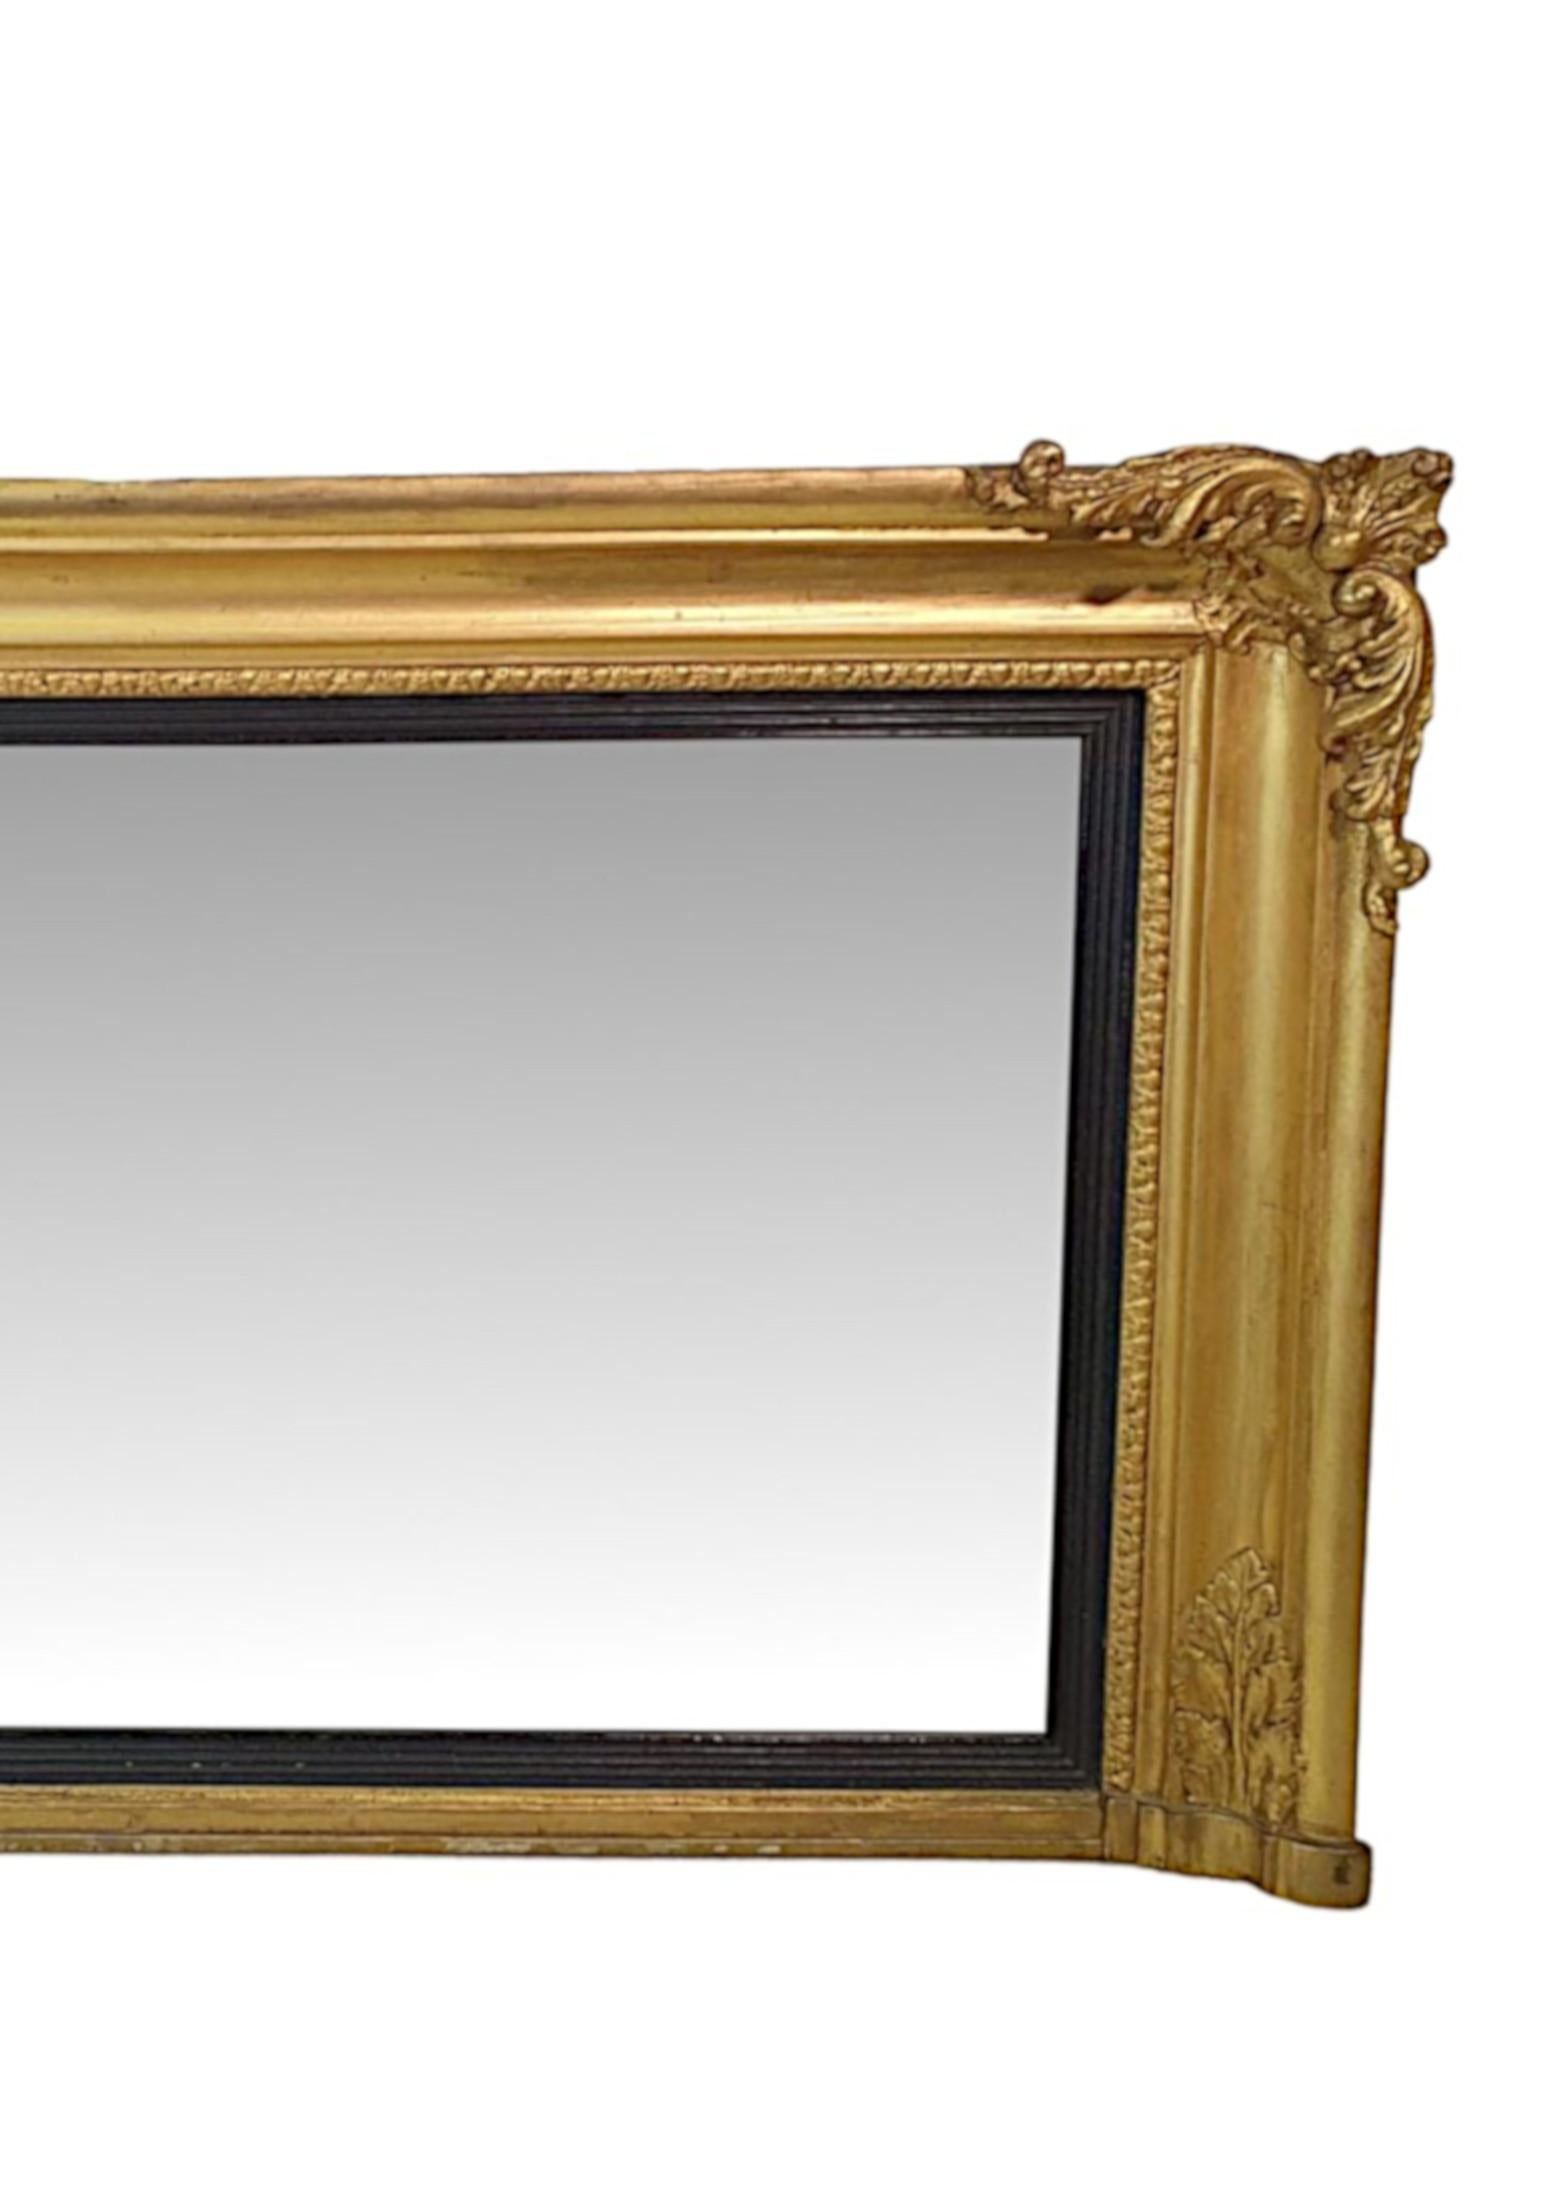 Early 19th century Regency giltwood mirror of rectangular form and neat proportions. The mirror plate set within reeded ebonised border within a moulded giltwood frame with acanthus and egg and dart motifs, surmounted with finely carved scrolling